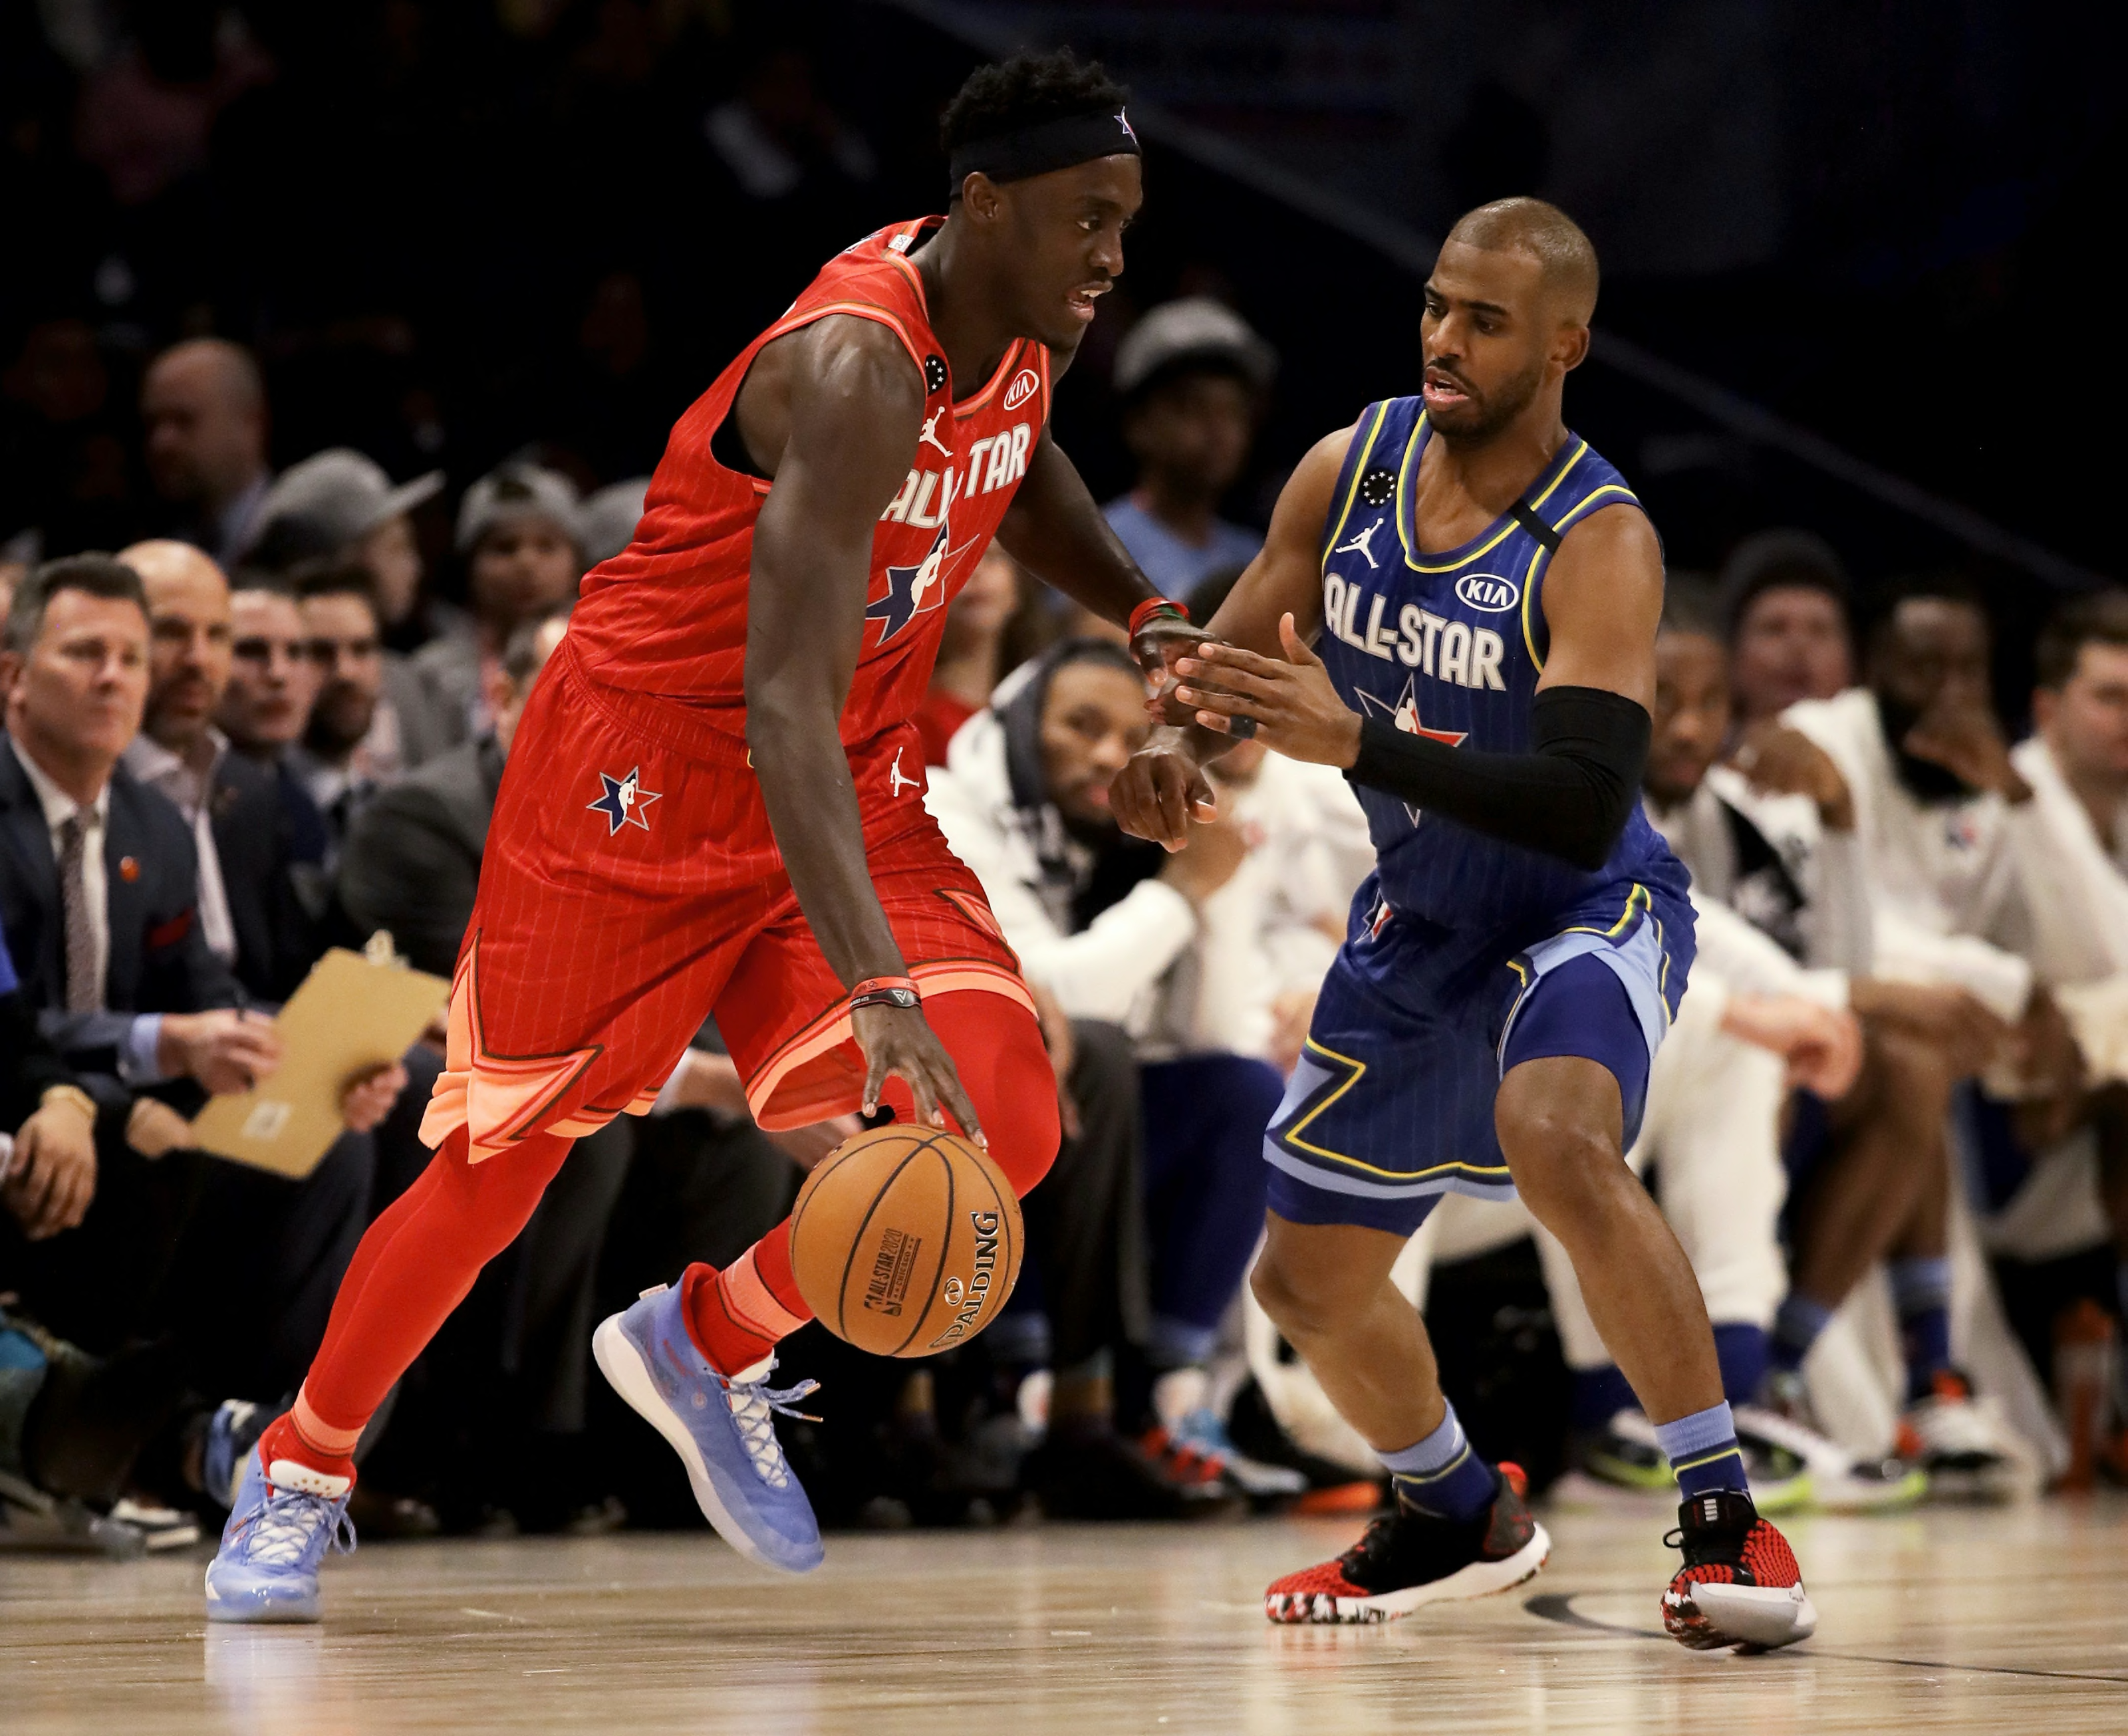 NBA All-Star Game 2018: Five takeaways from Team LeBron against